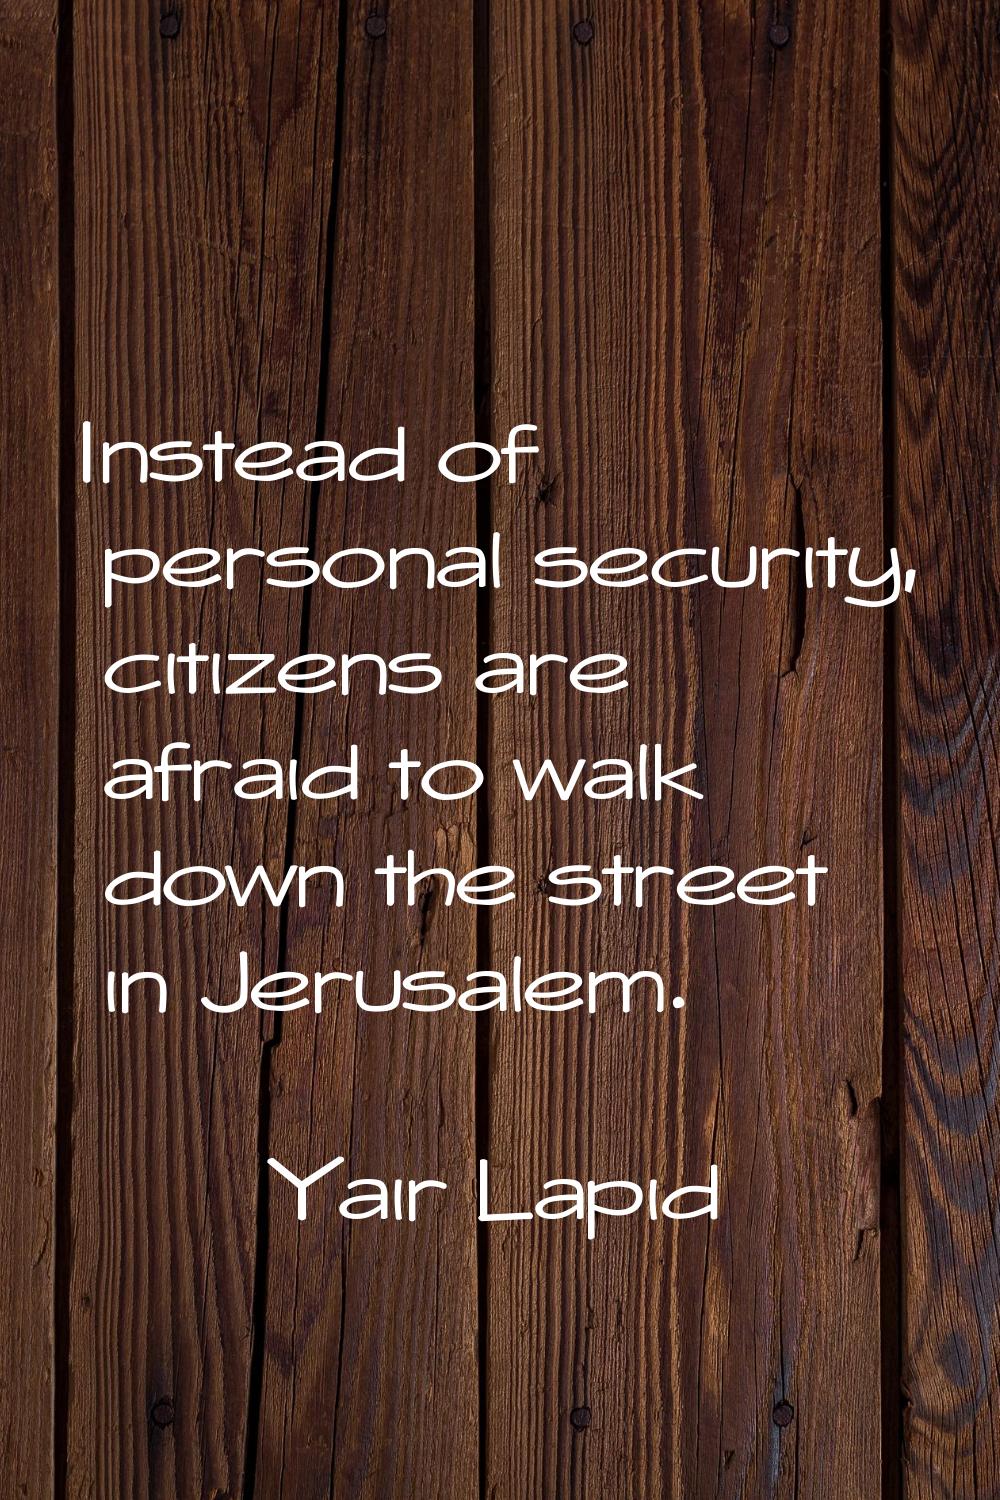 Instead of personal security, citizens are afraid to walk down the street in Jerusalem.